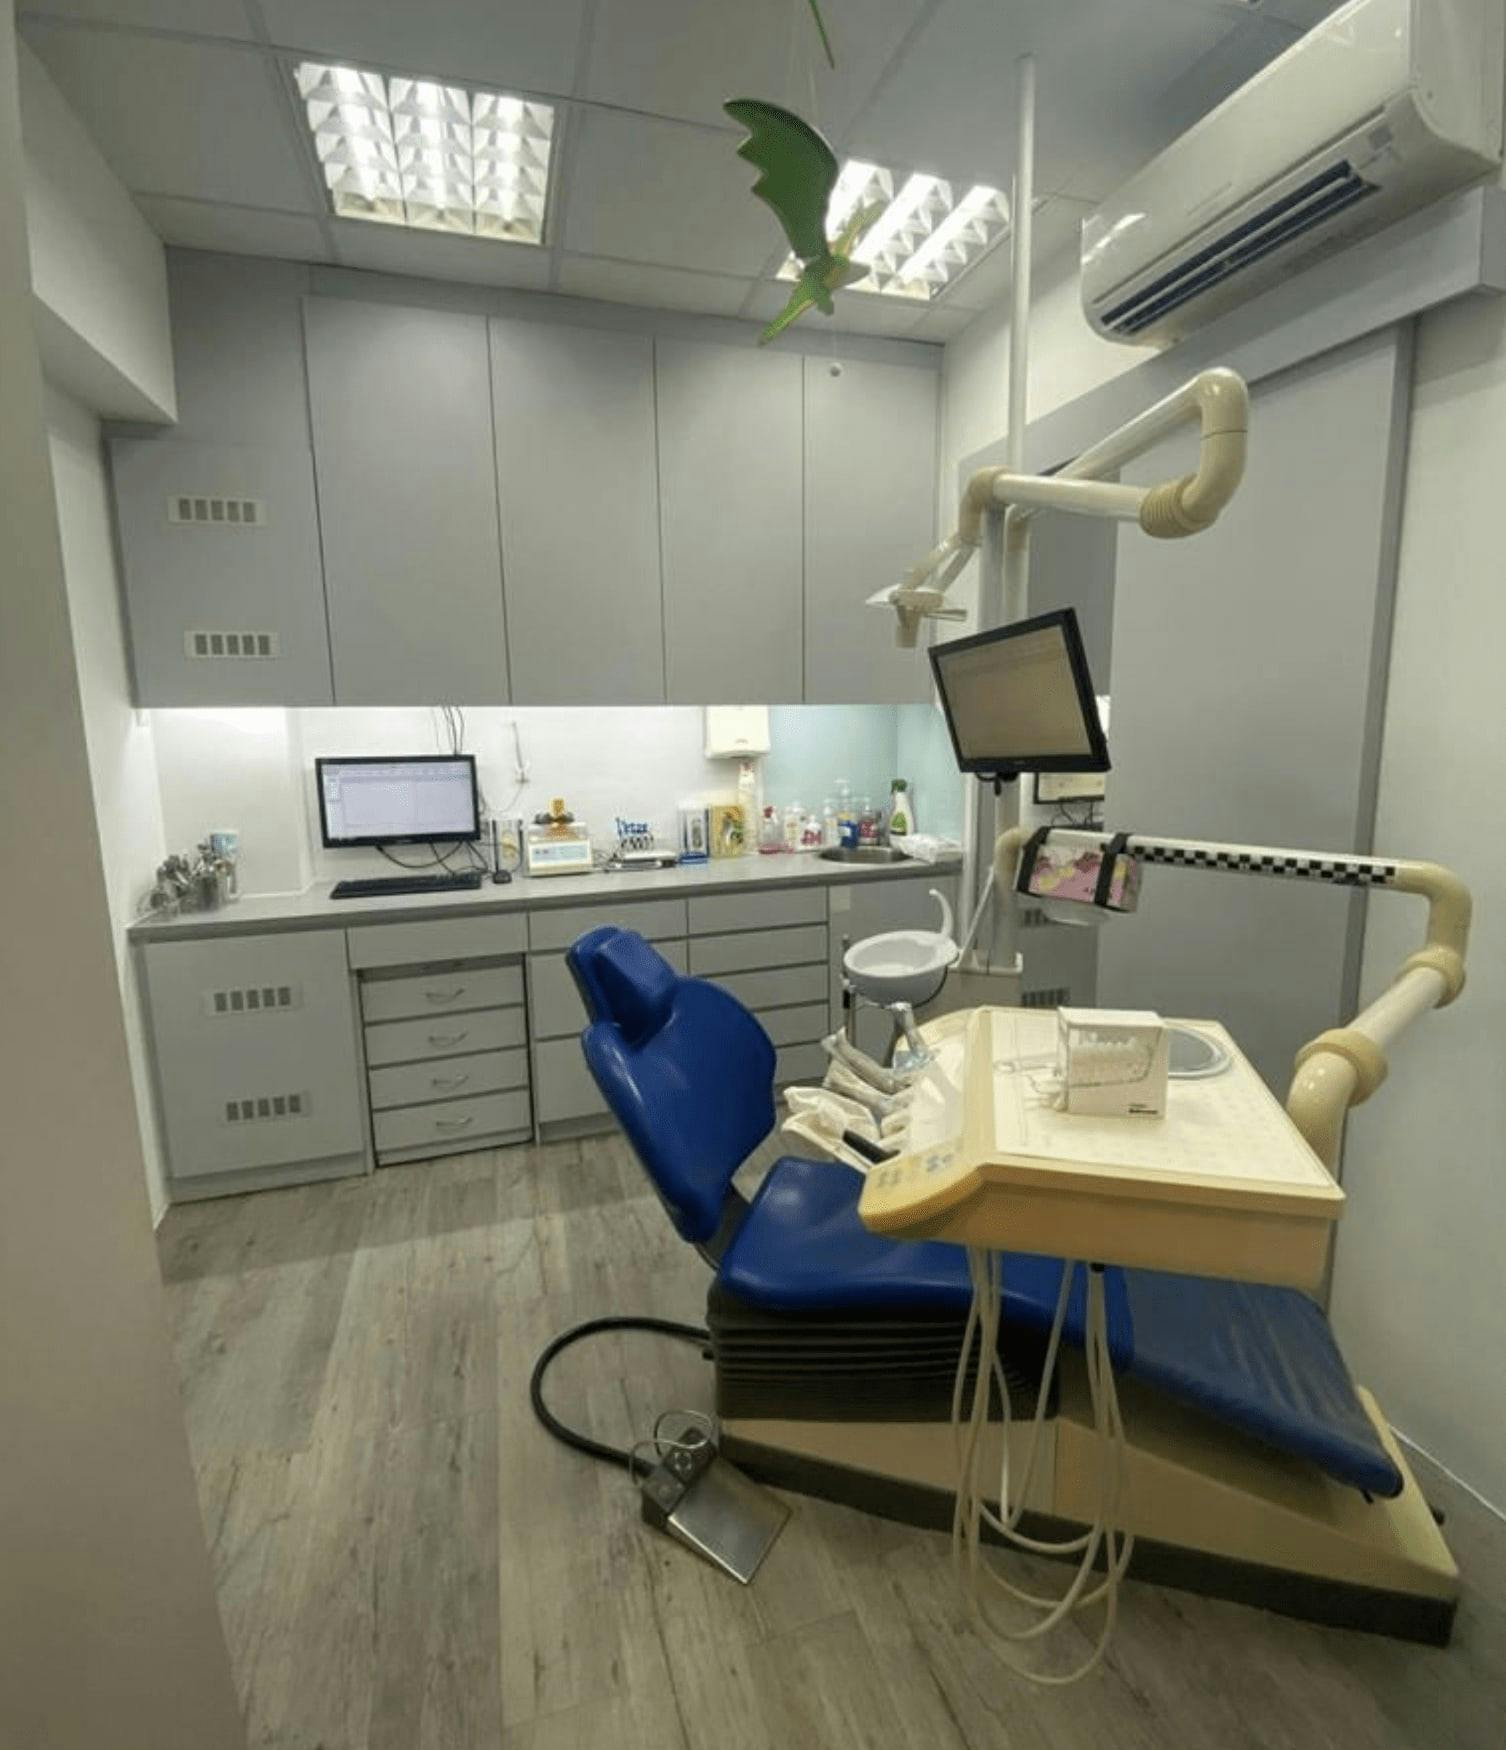 photo for T32 Dental Pearl @ Bedok